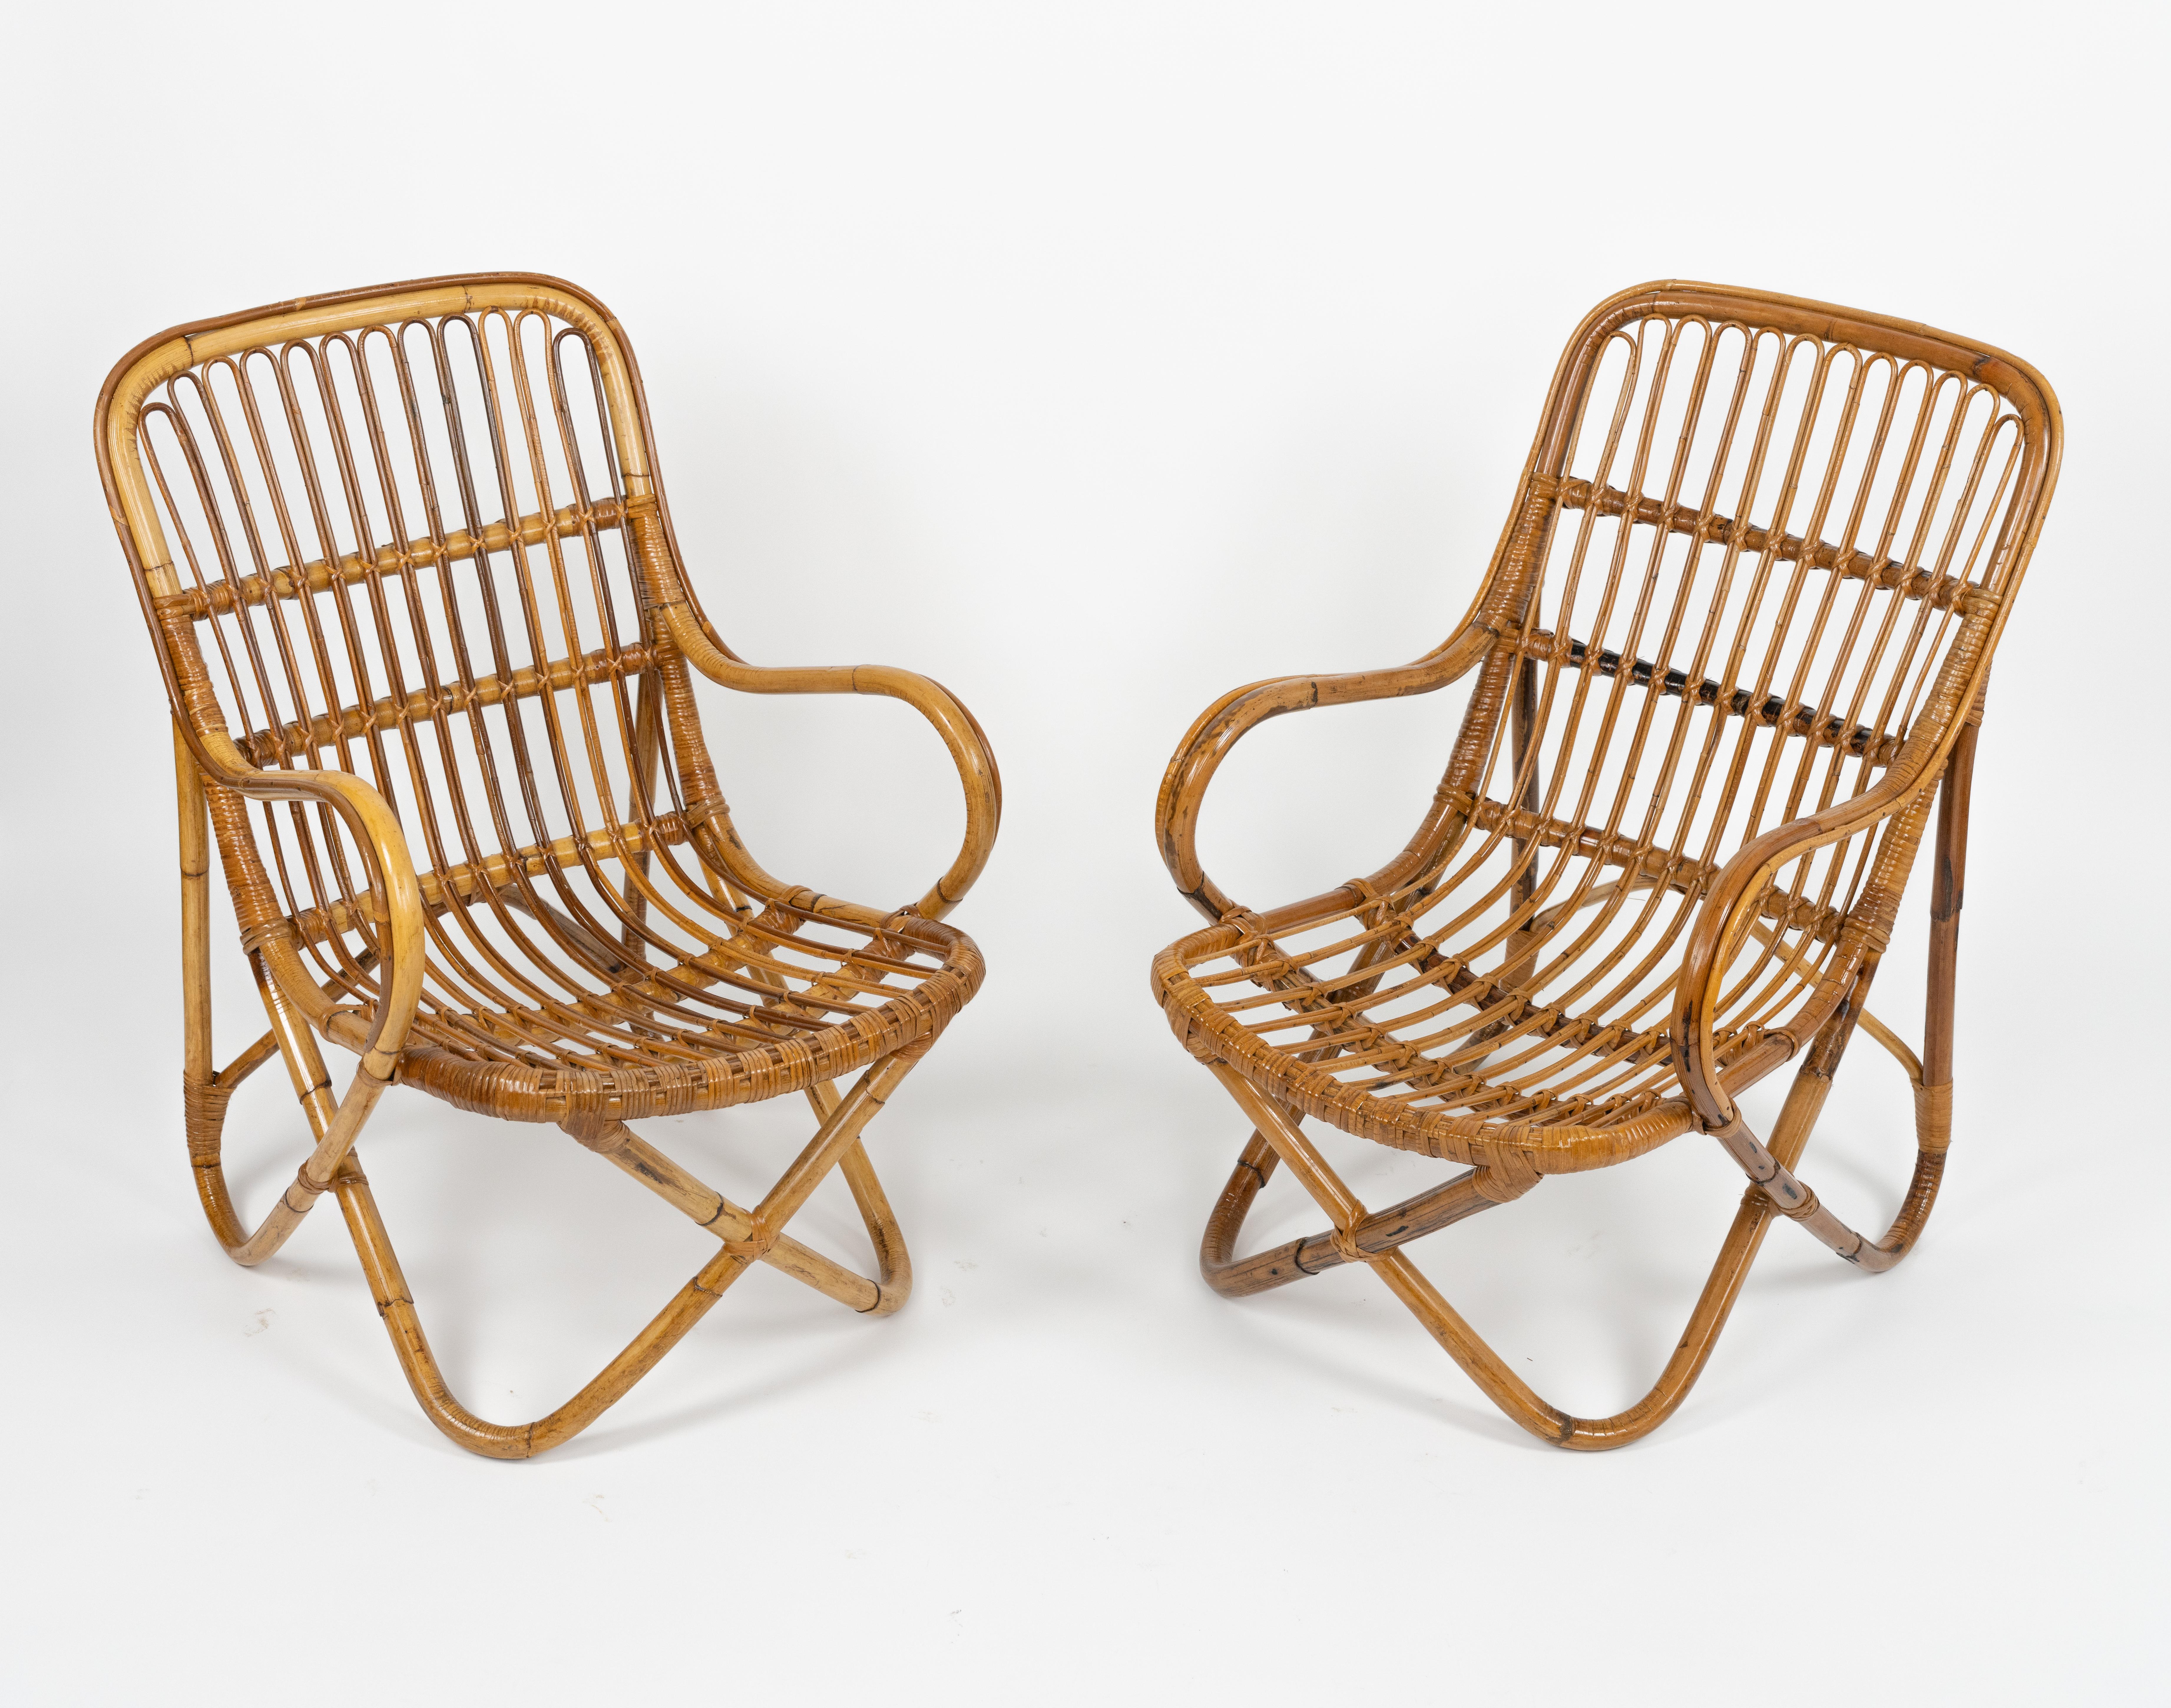 Midcentury Bamboo and Rattan Pair of Armchairs Tito Agnoli Style, Italy 1960s For Sale 4